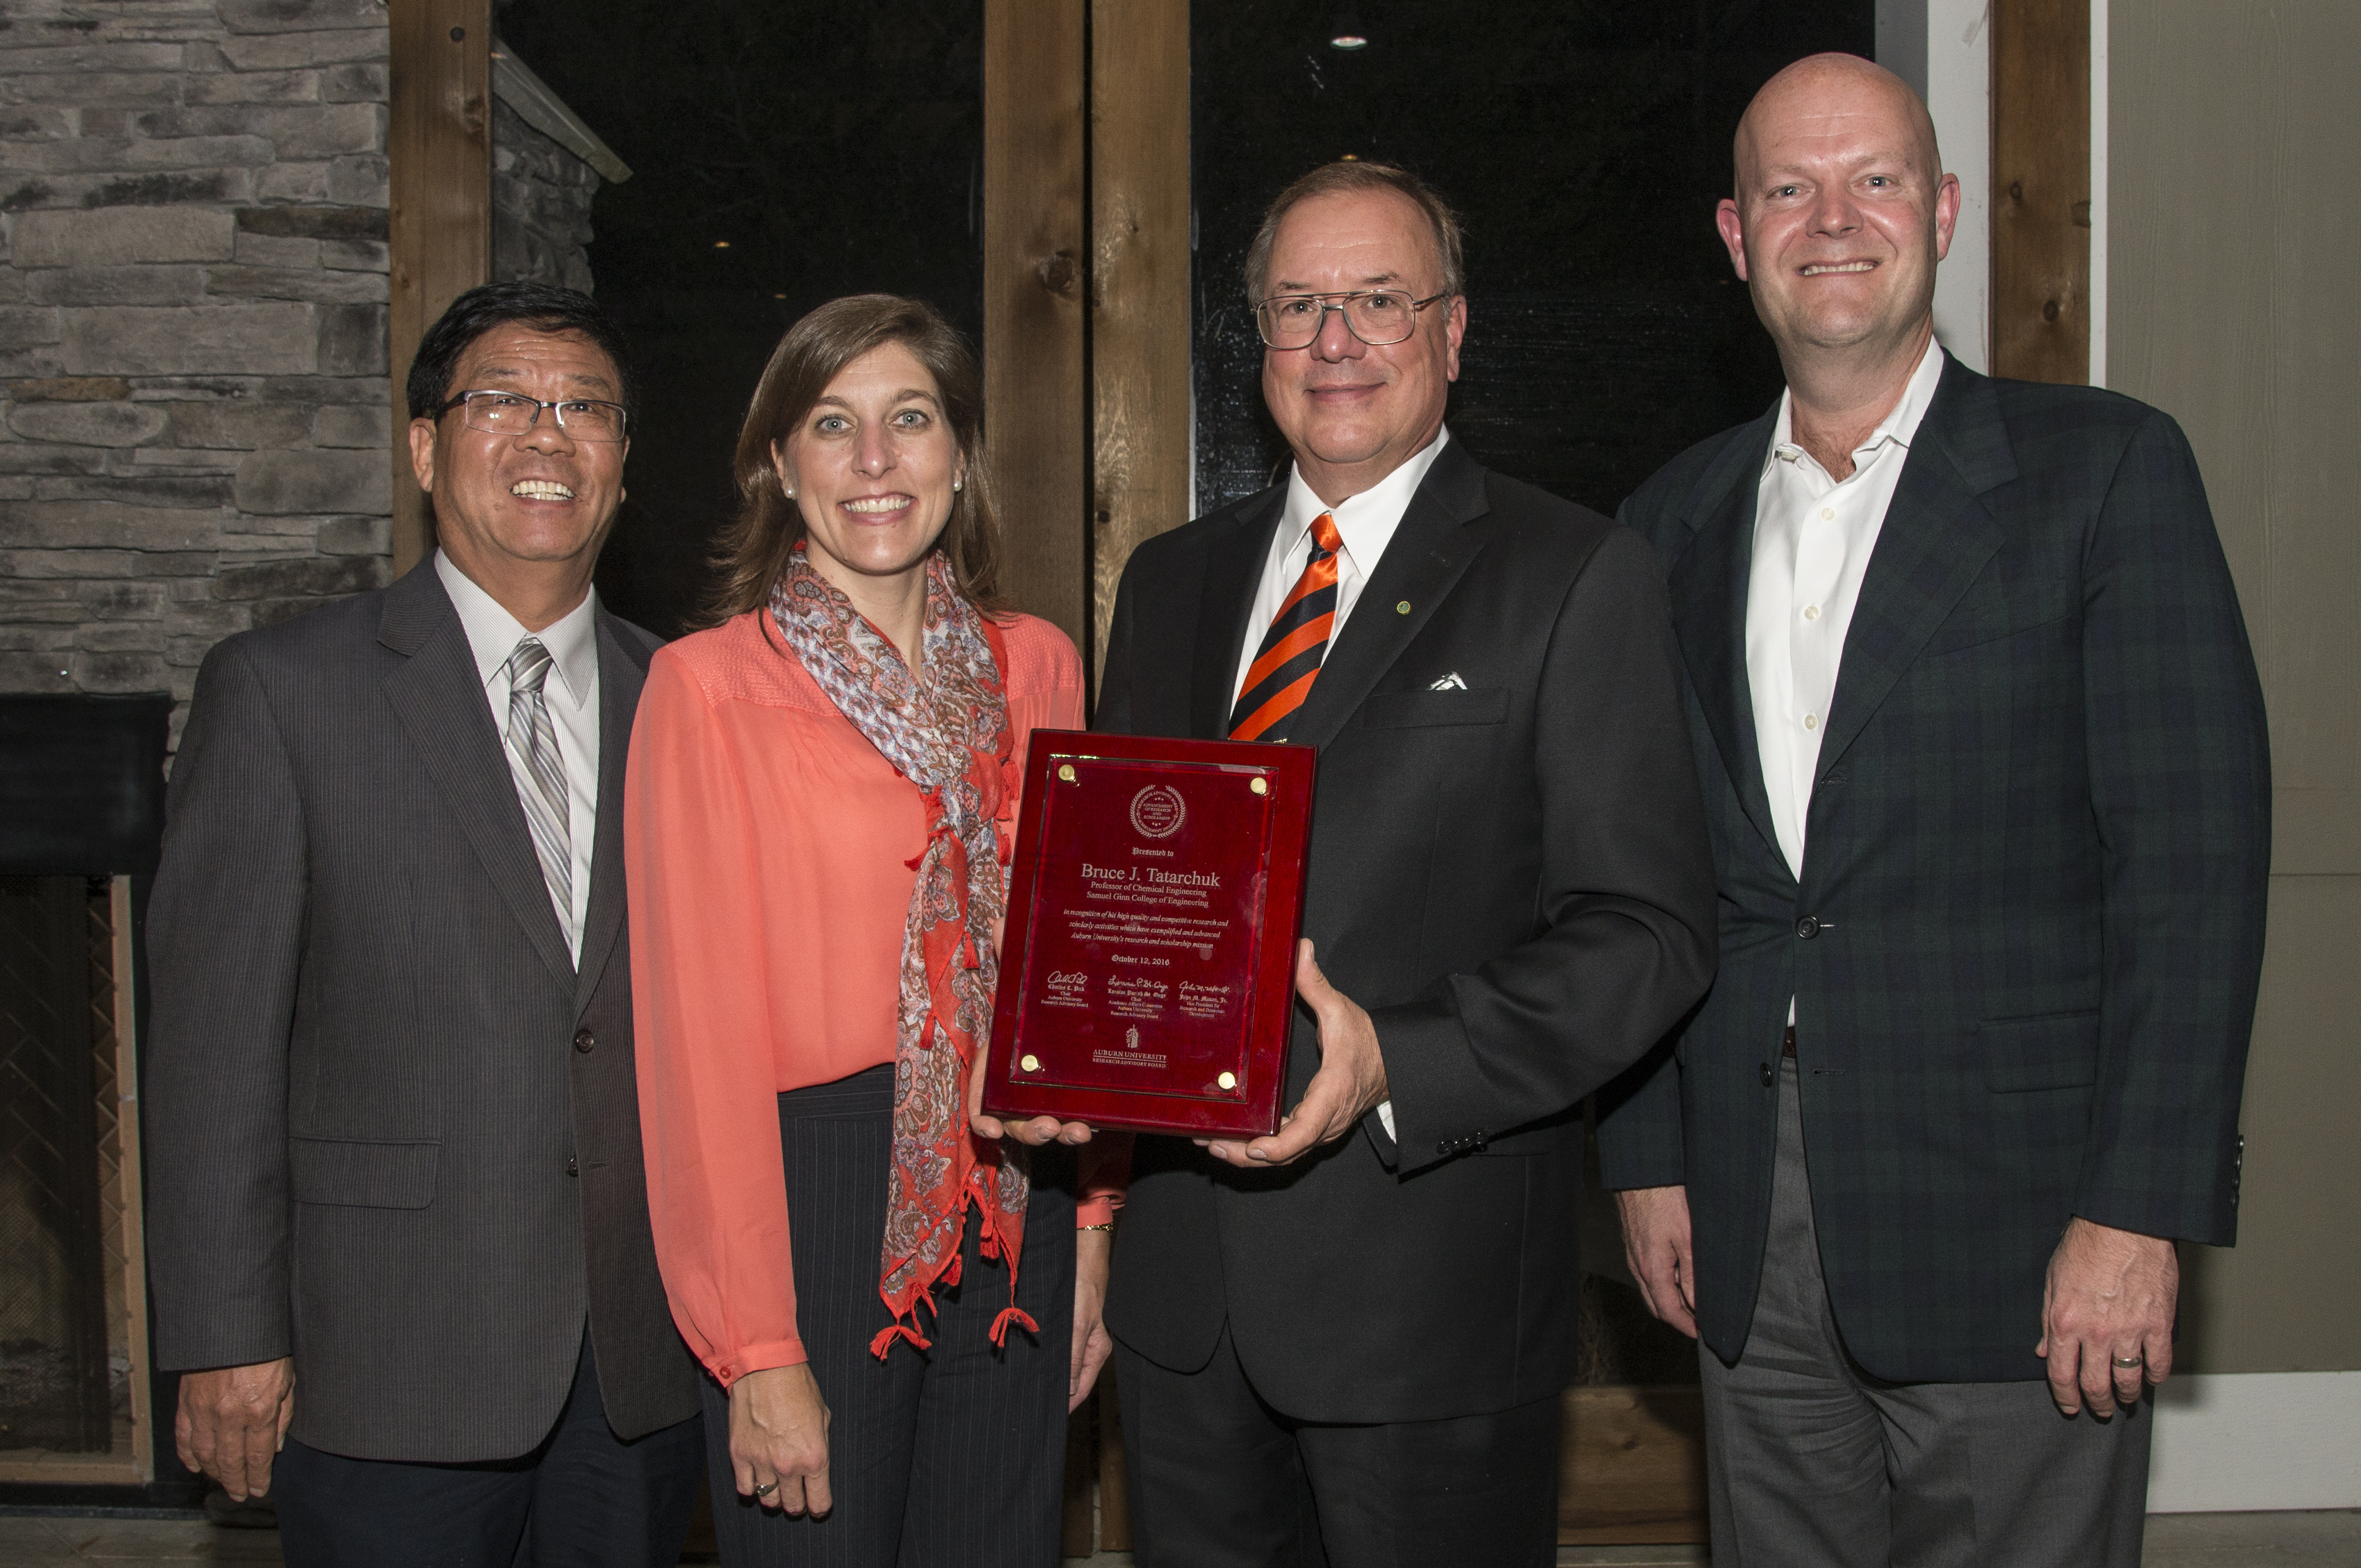 Dr. Bruck Tatarchuk receives the 2016 Research Advisory Board Advancement of Research & Scholarship Achievement Award from Dr. John Liu, Assoc. Provost & Associate VP for Research, Dr. Lori St. Onge, board member, and Mr. Charles Pick, board chair.